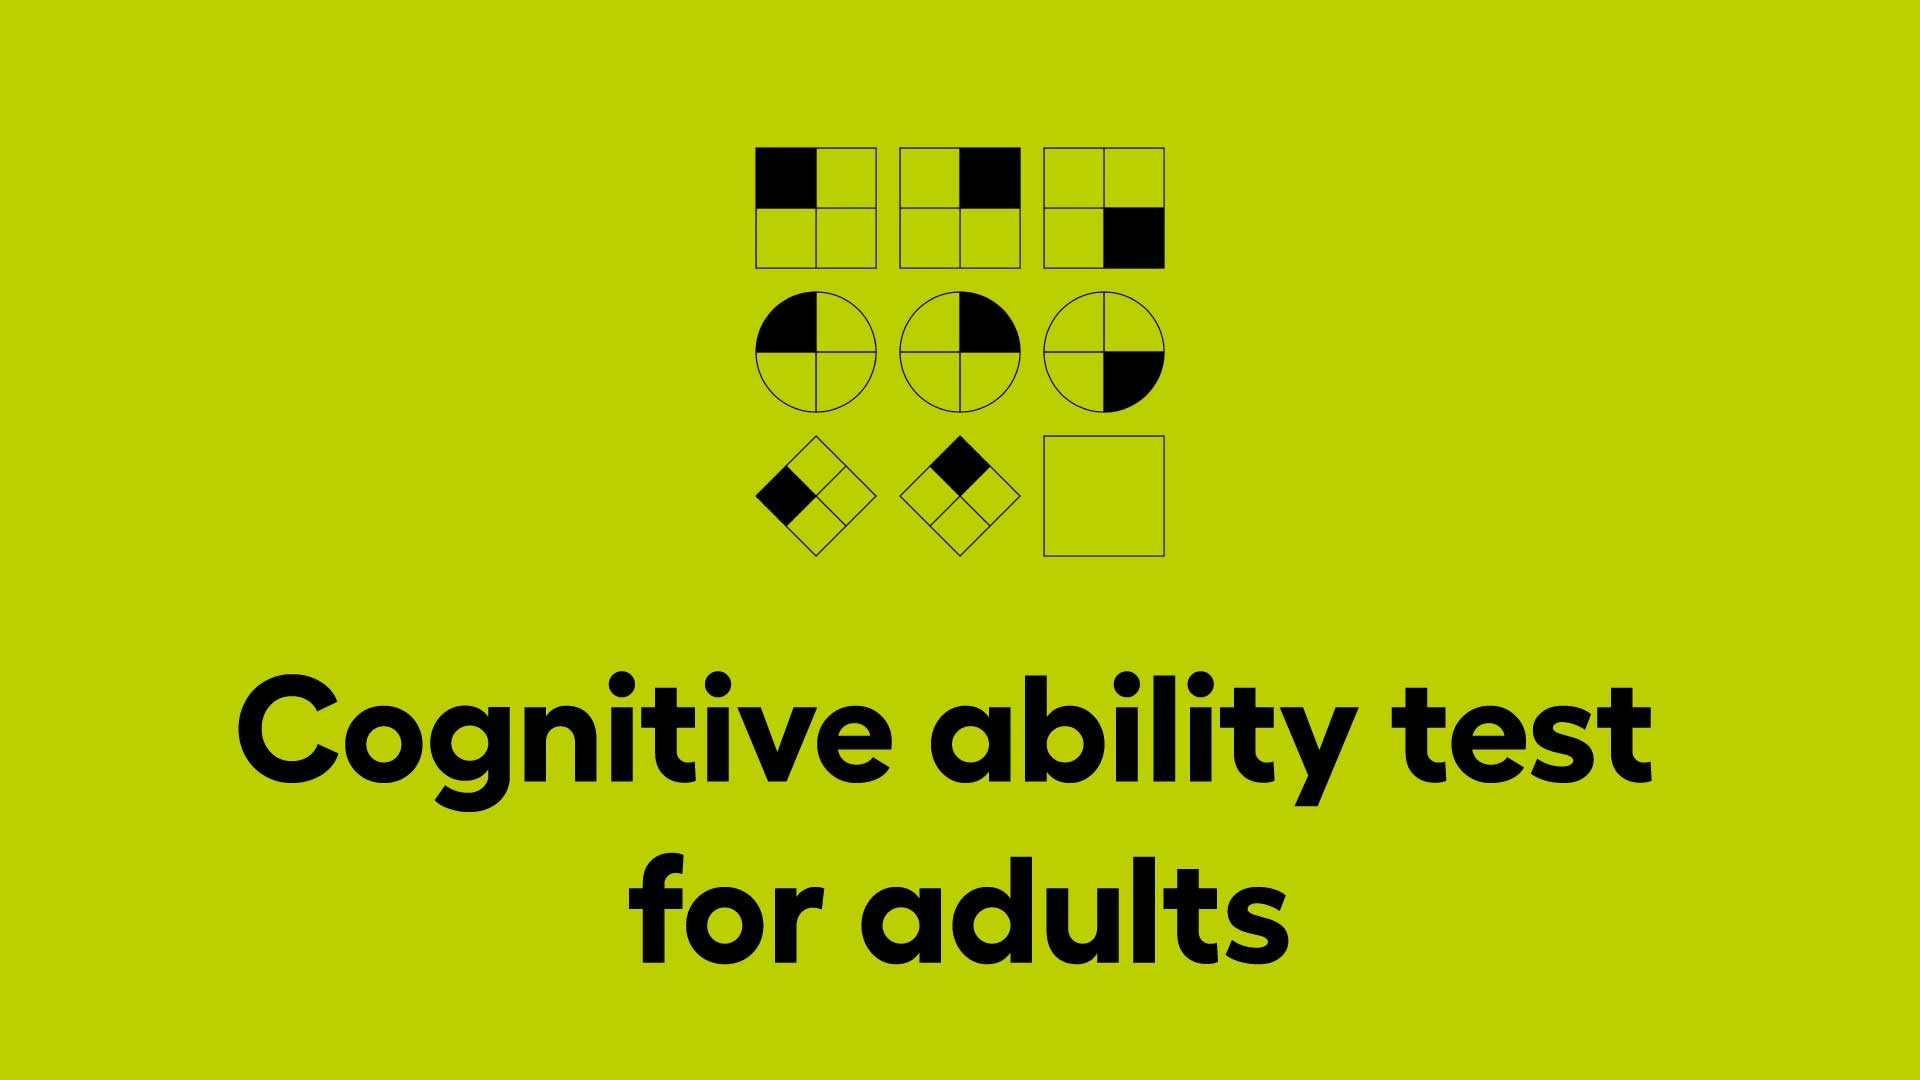 Cognitive ability test for adults